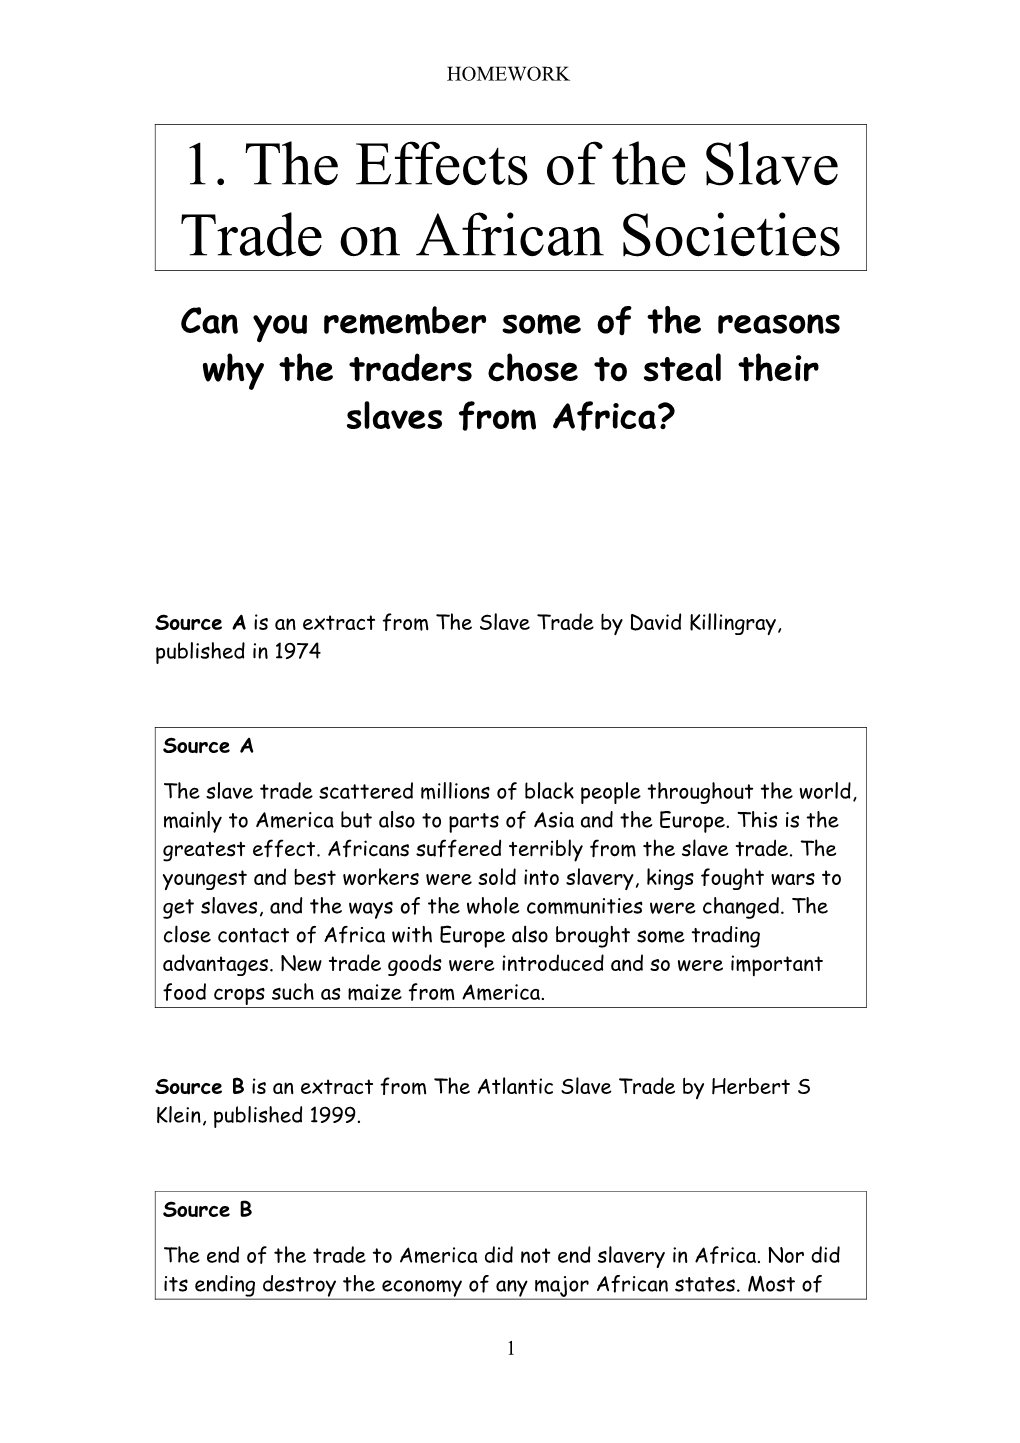 The Effects of the Slave Trade on African Societies